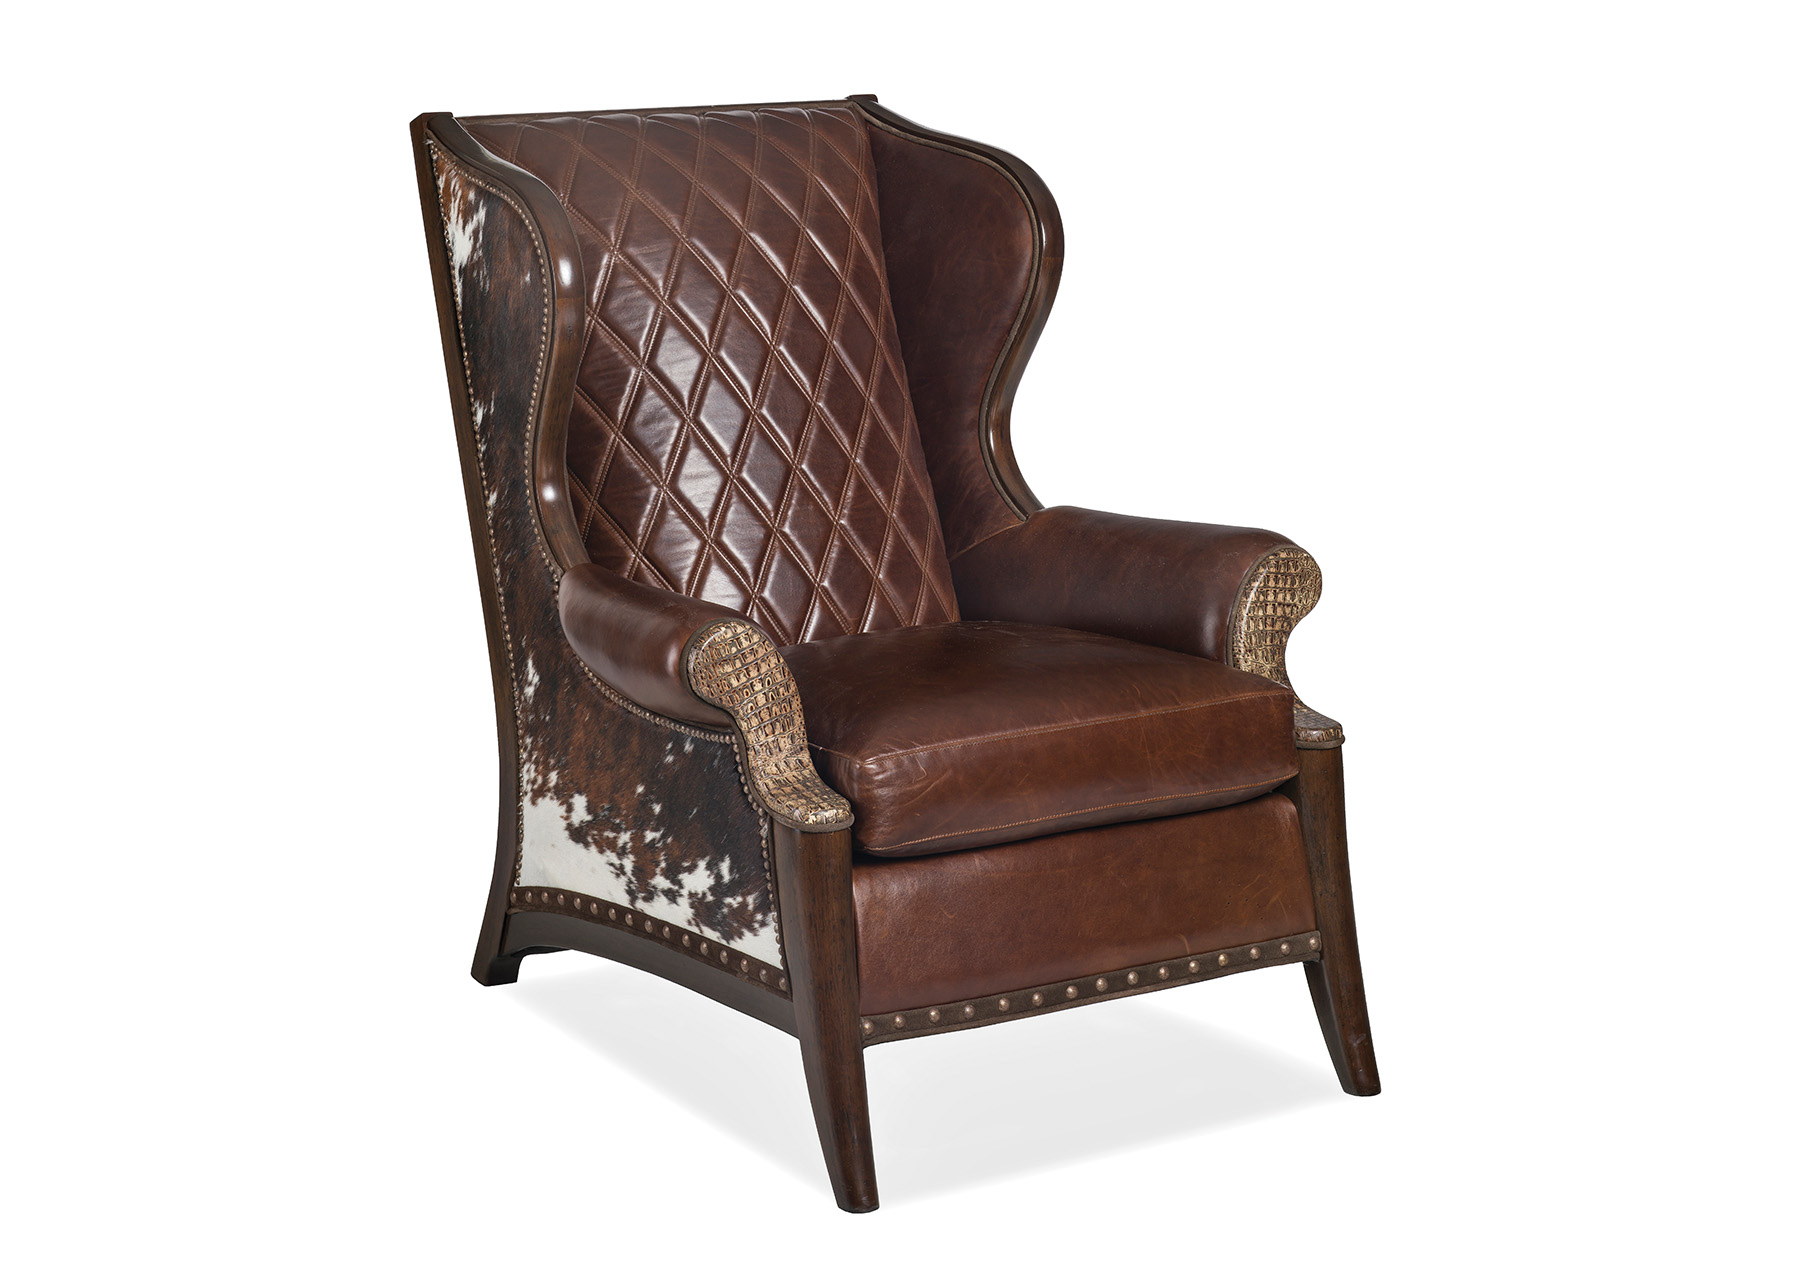 PAINTER'S QUILTED WING CHAIR